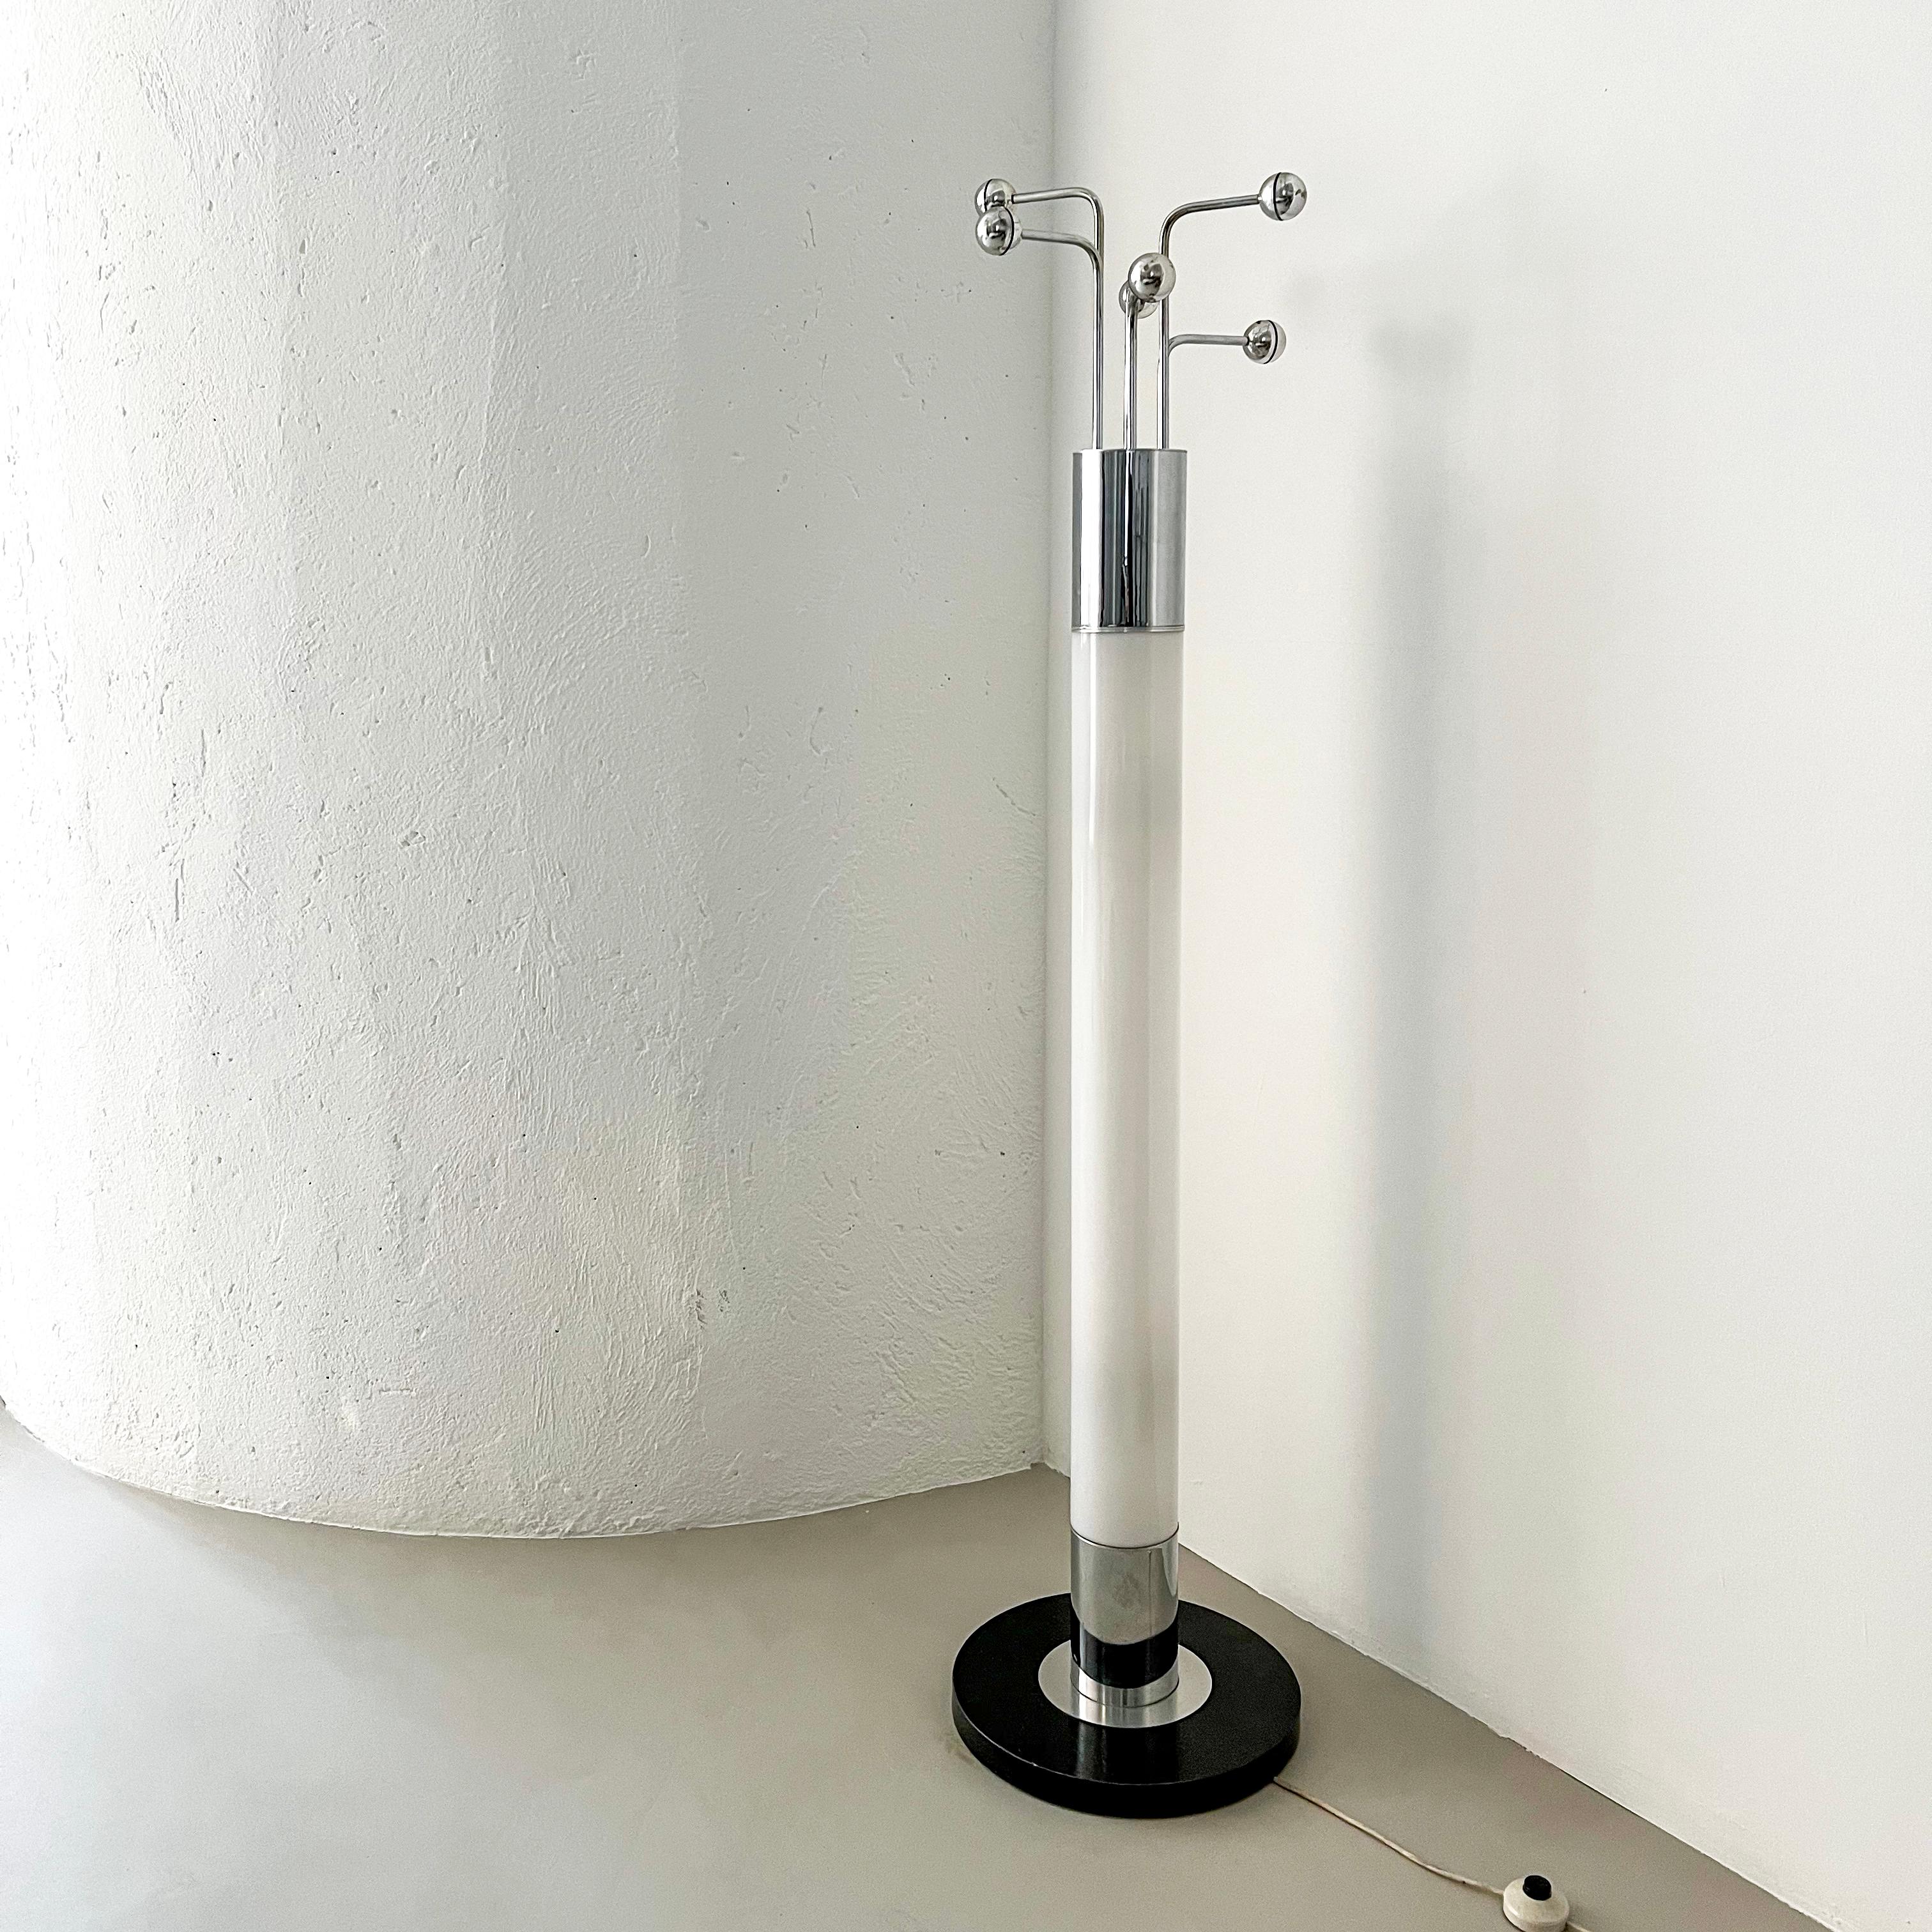 Late 20th Century Vintage Space Age Era Floor Standing Coat Rack with Integrated Lamp, Italy 1970s